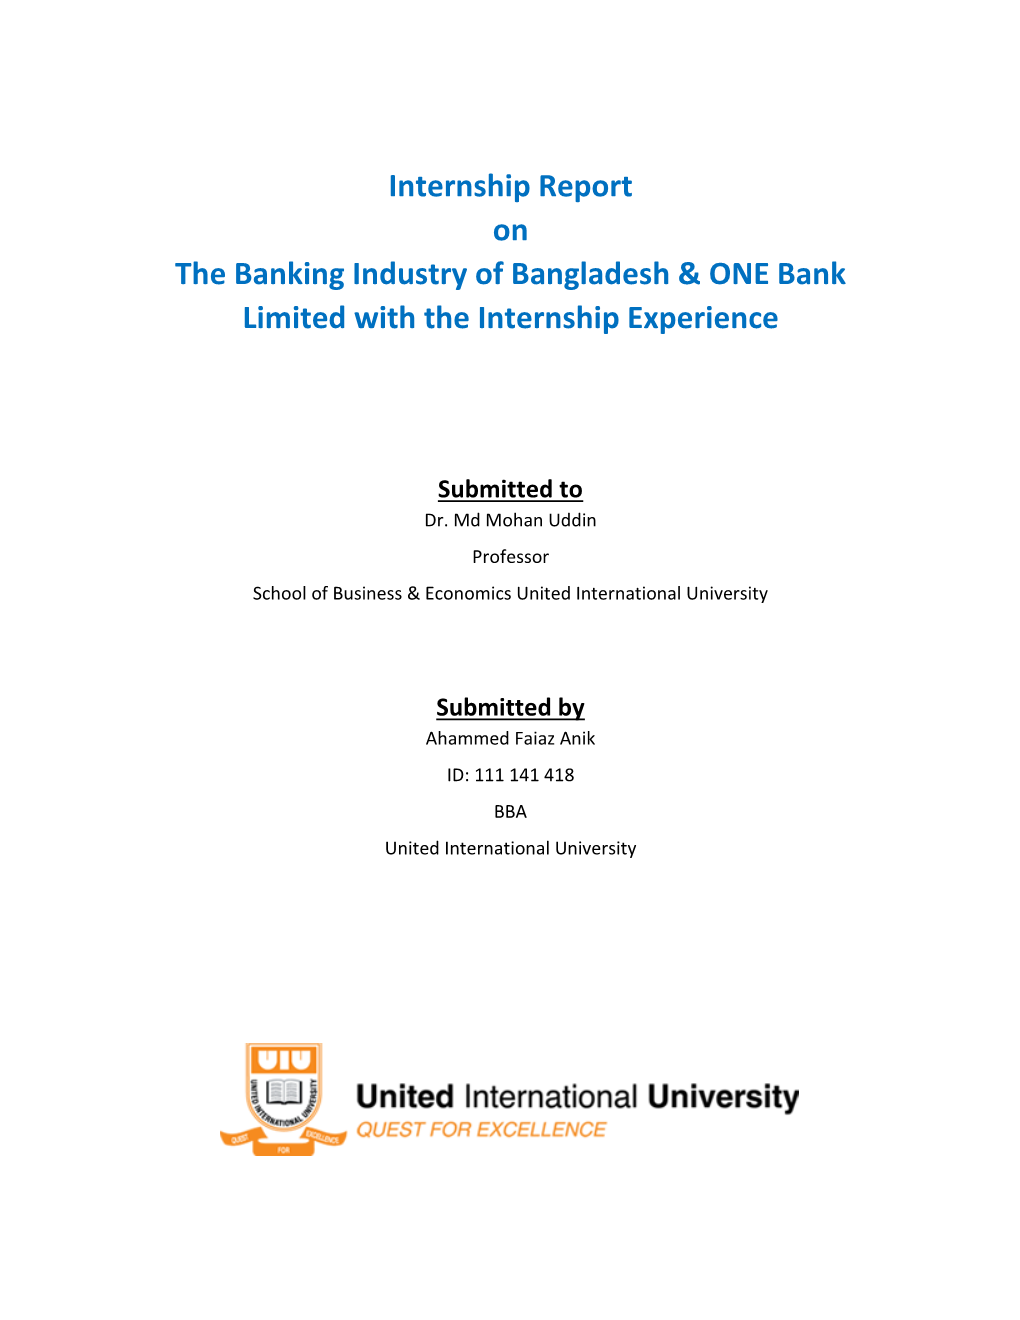 Internship Report on the Banking Industry of Bangladesh & ONE